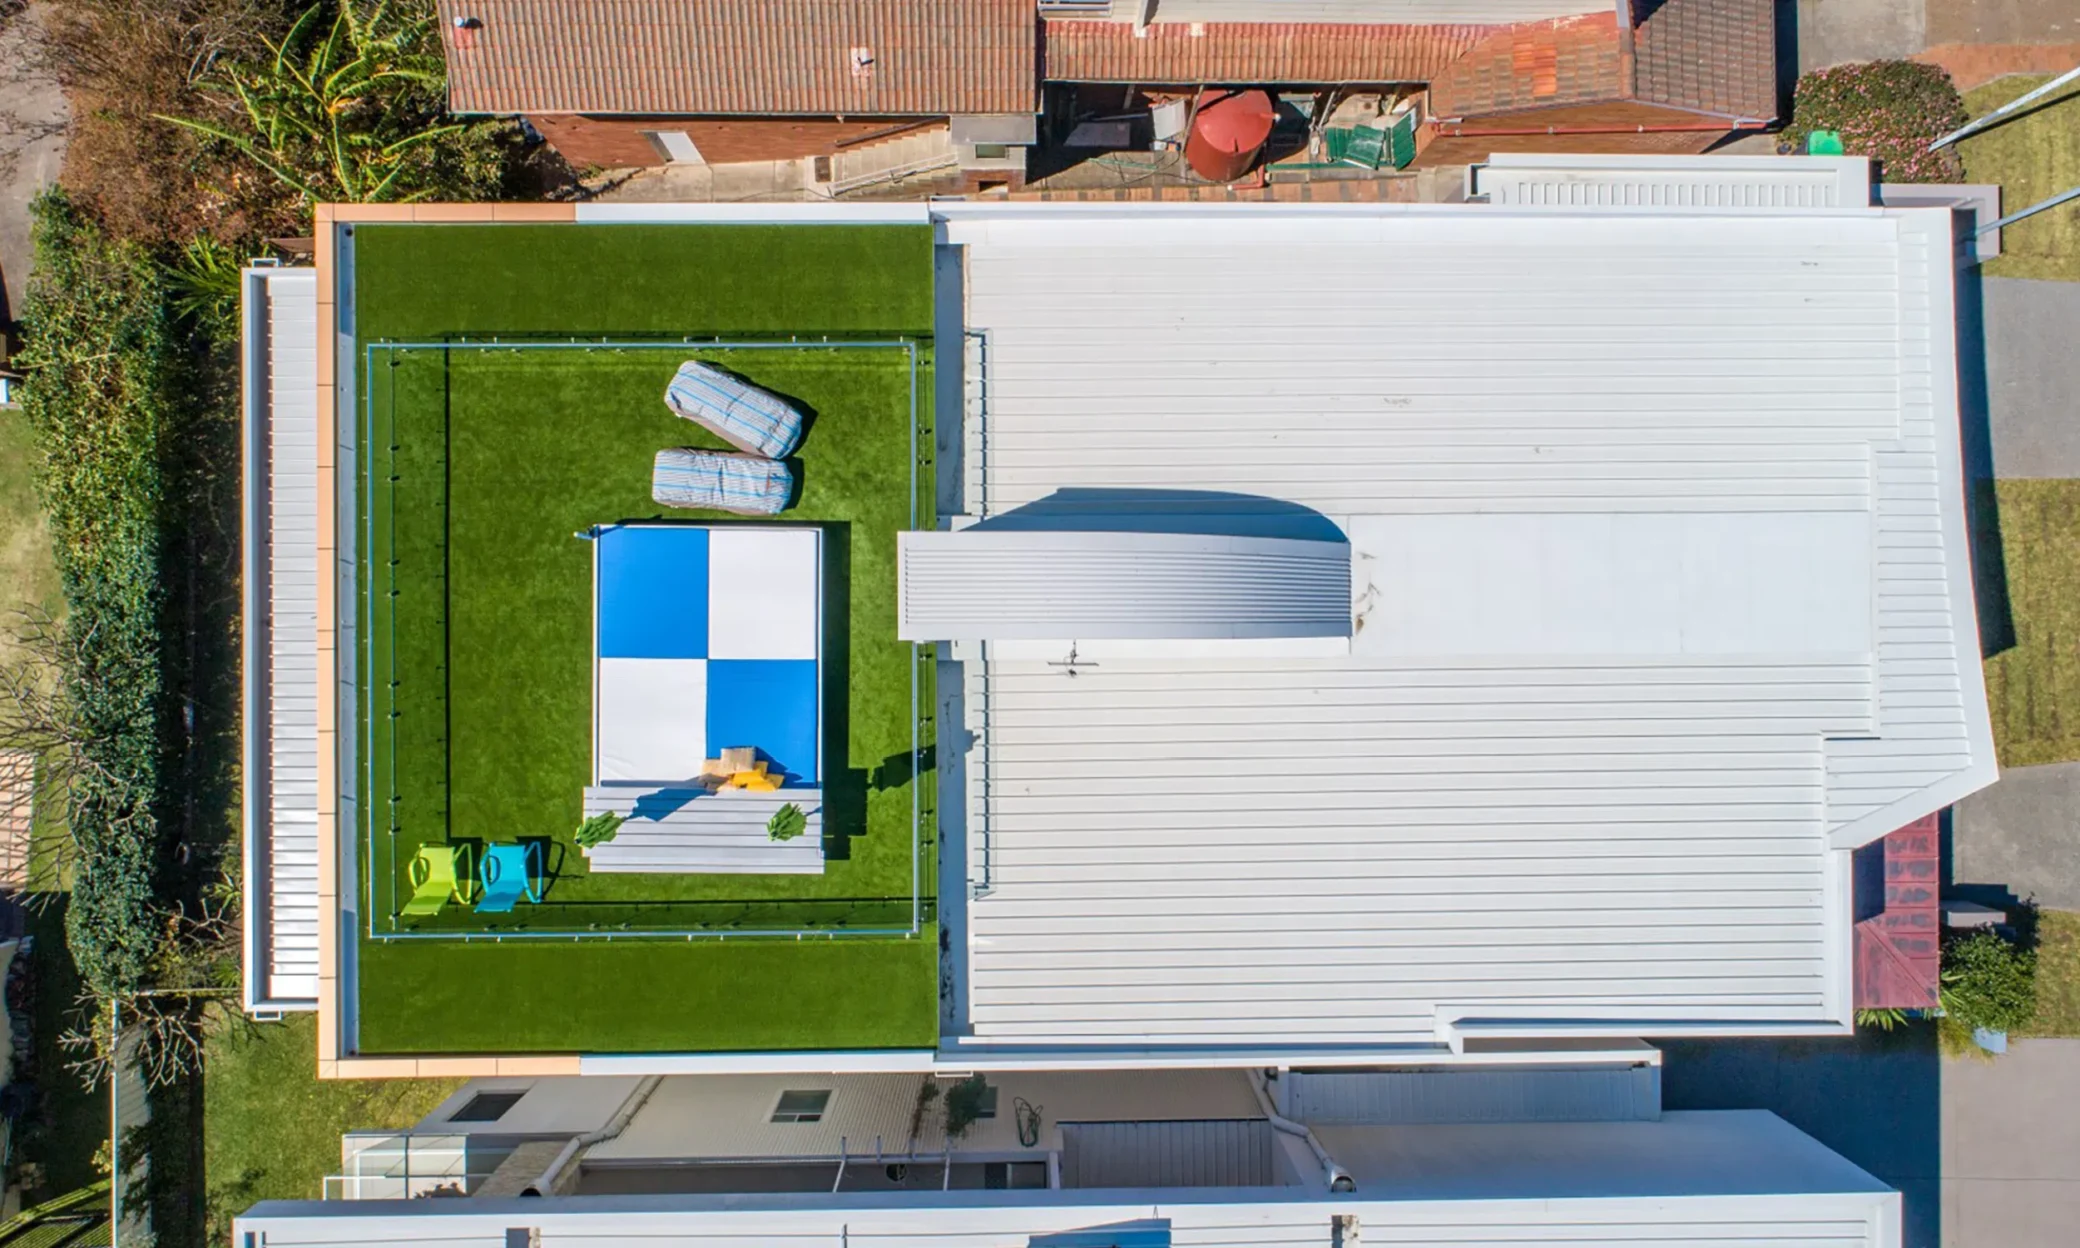 Aerial view of a residential property in Newcastle with a white, flat-roofed house featuring a rooftop mini soccer field surrounded by high walls, adjacent to other homes.